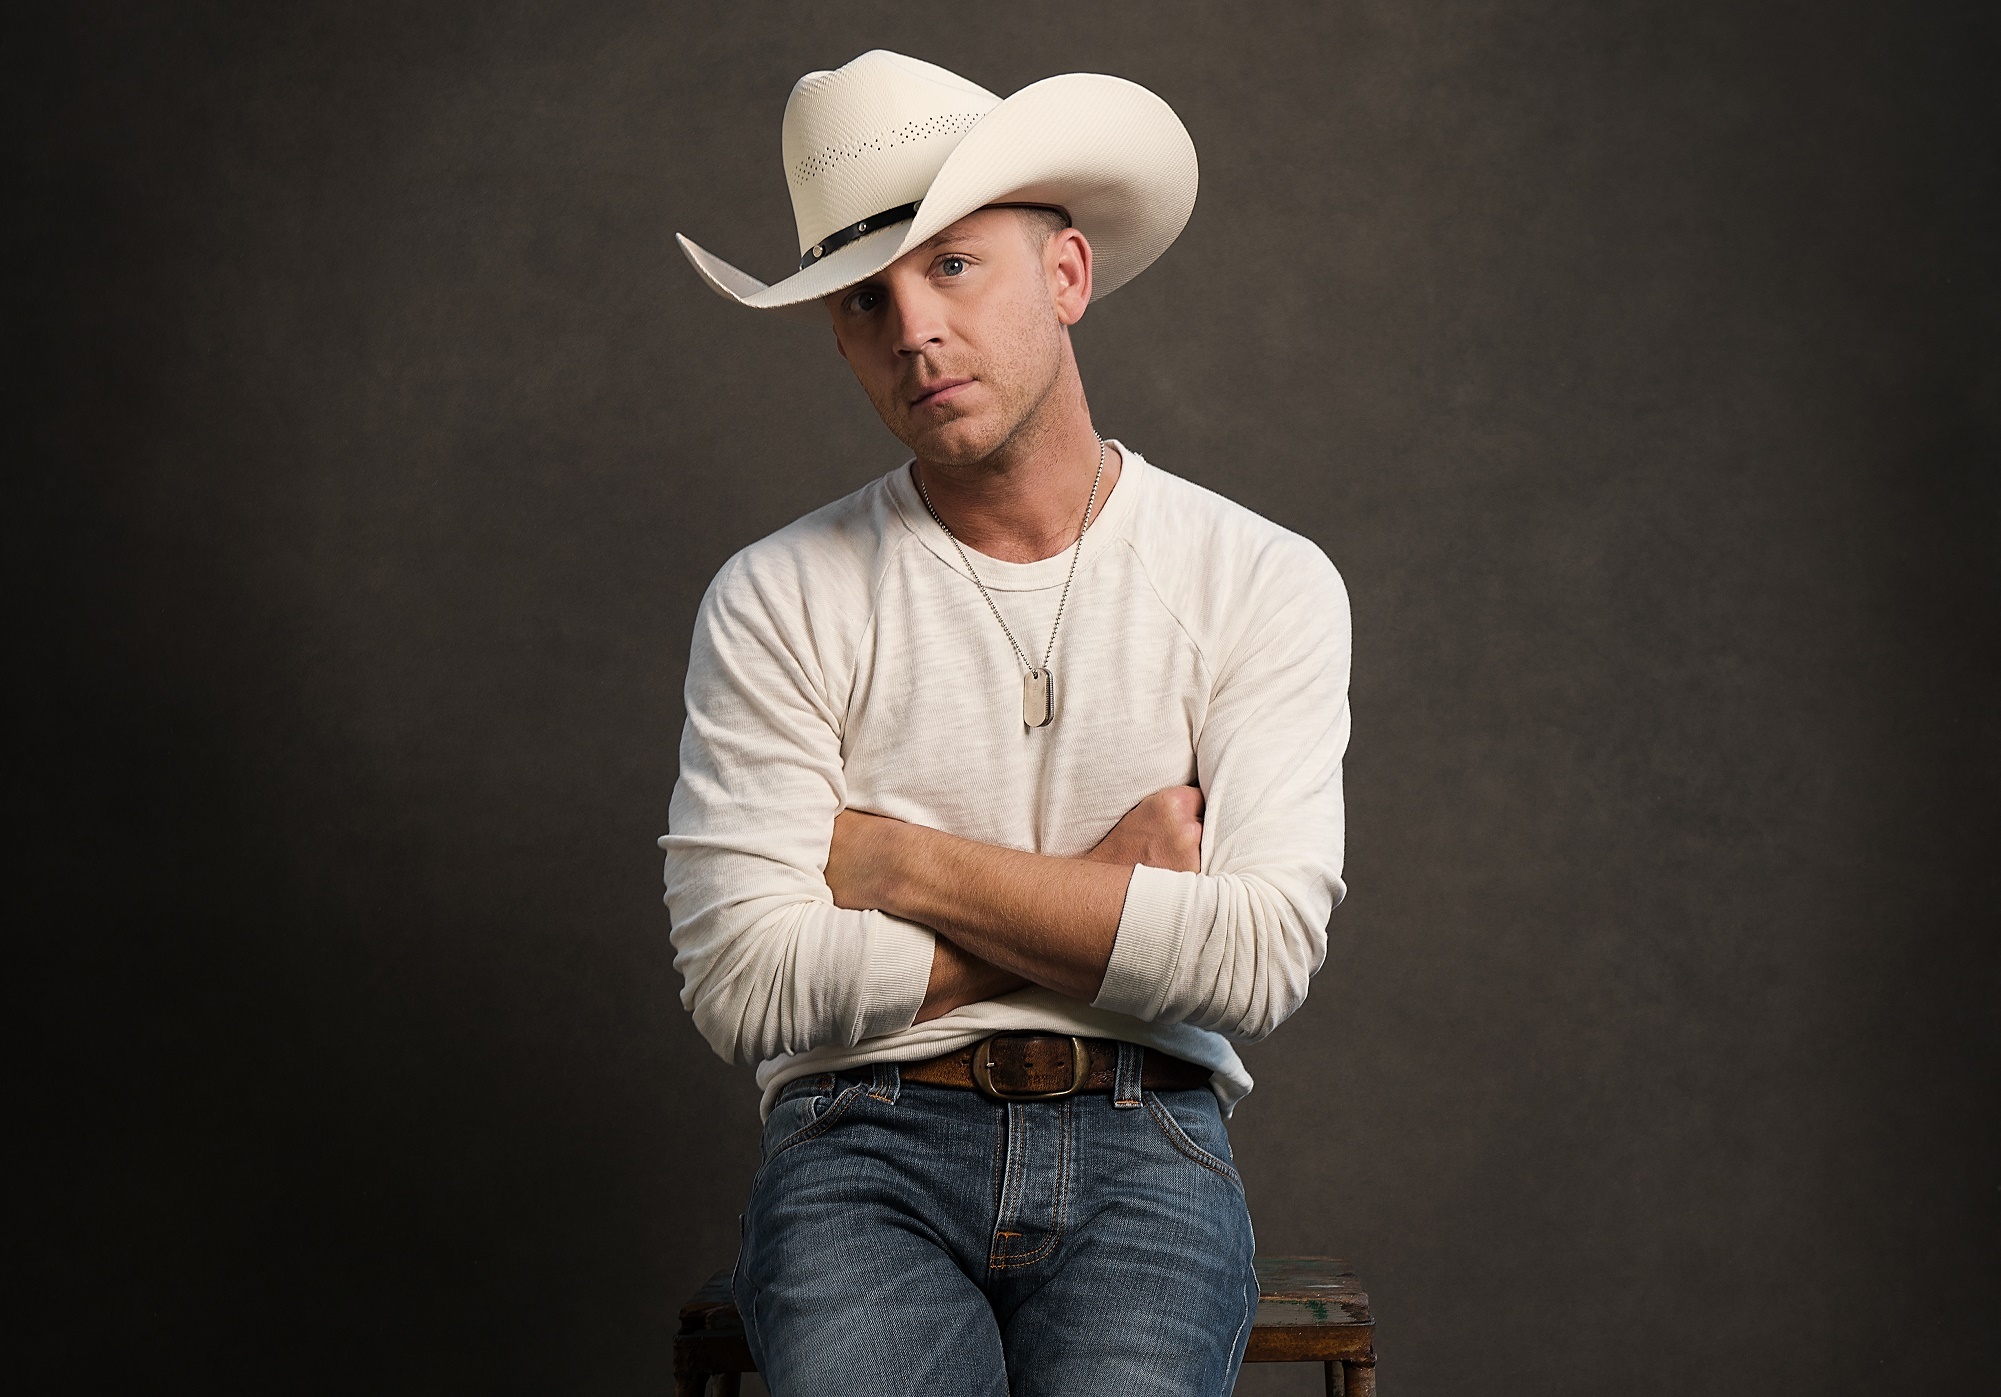 Justin Moore, Upcoming events, Tickets tour dates, 2010x1400 HD Desktop